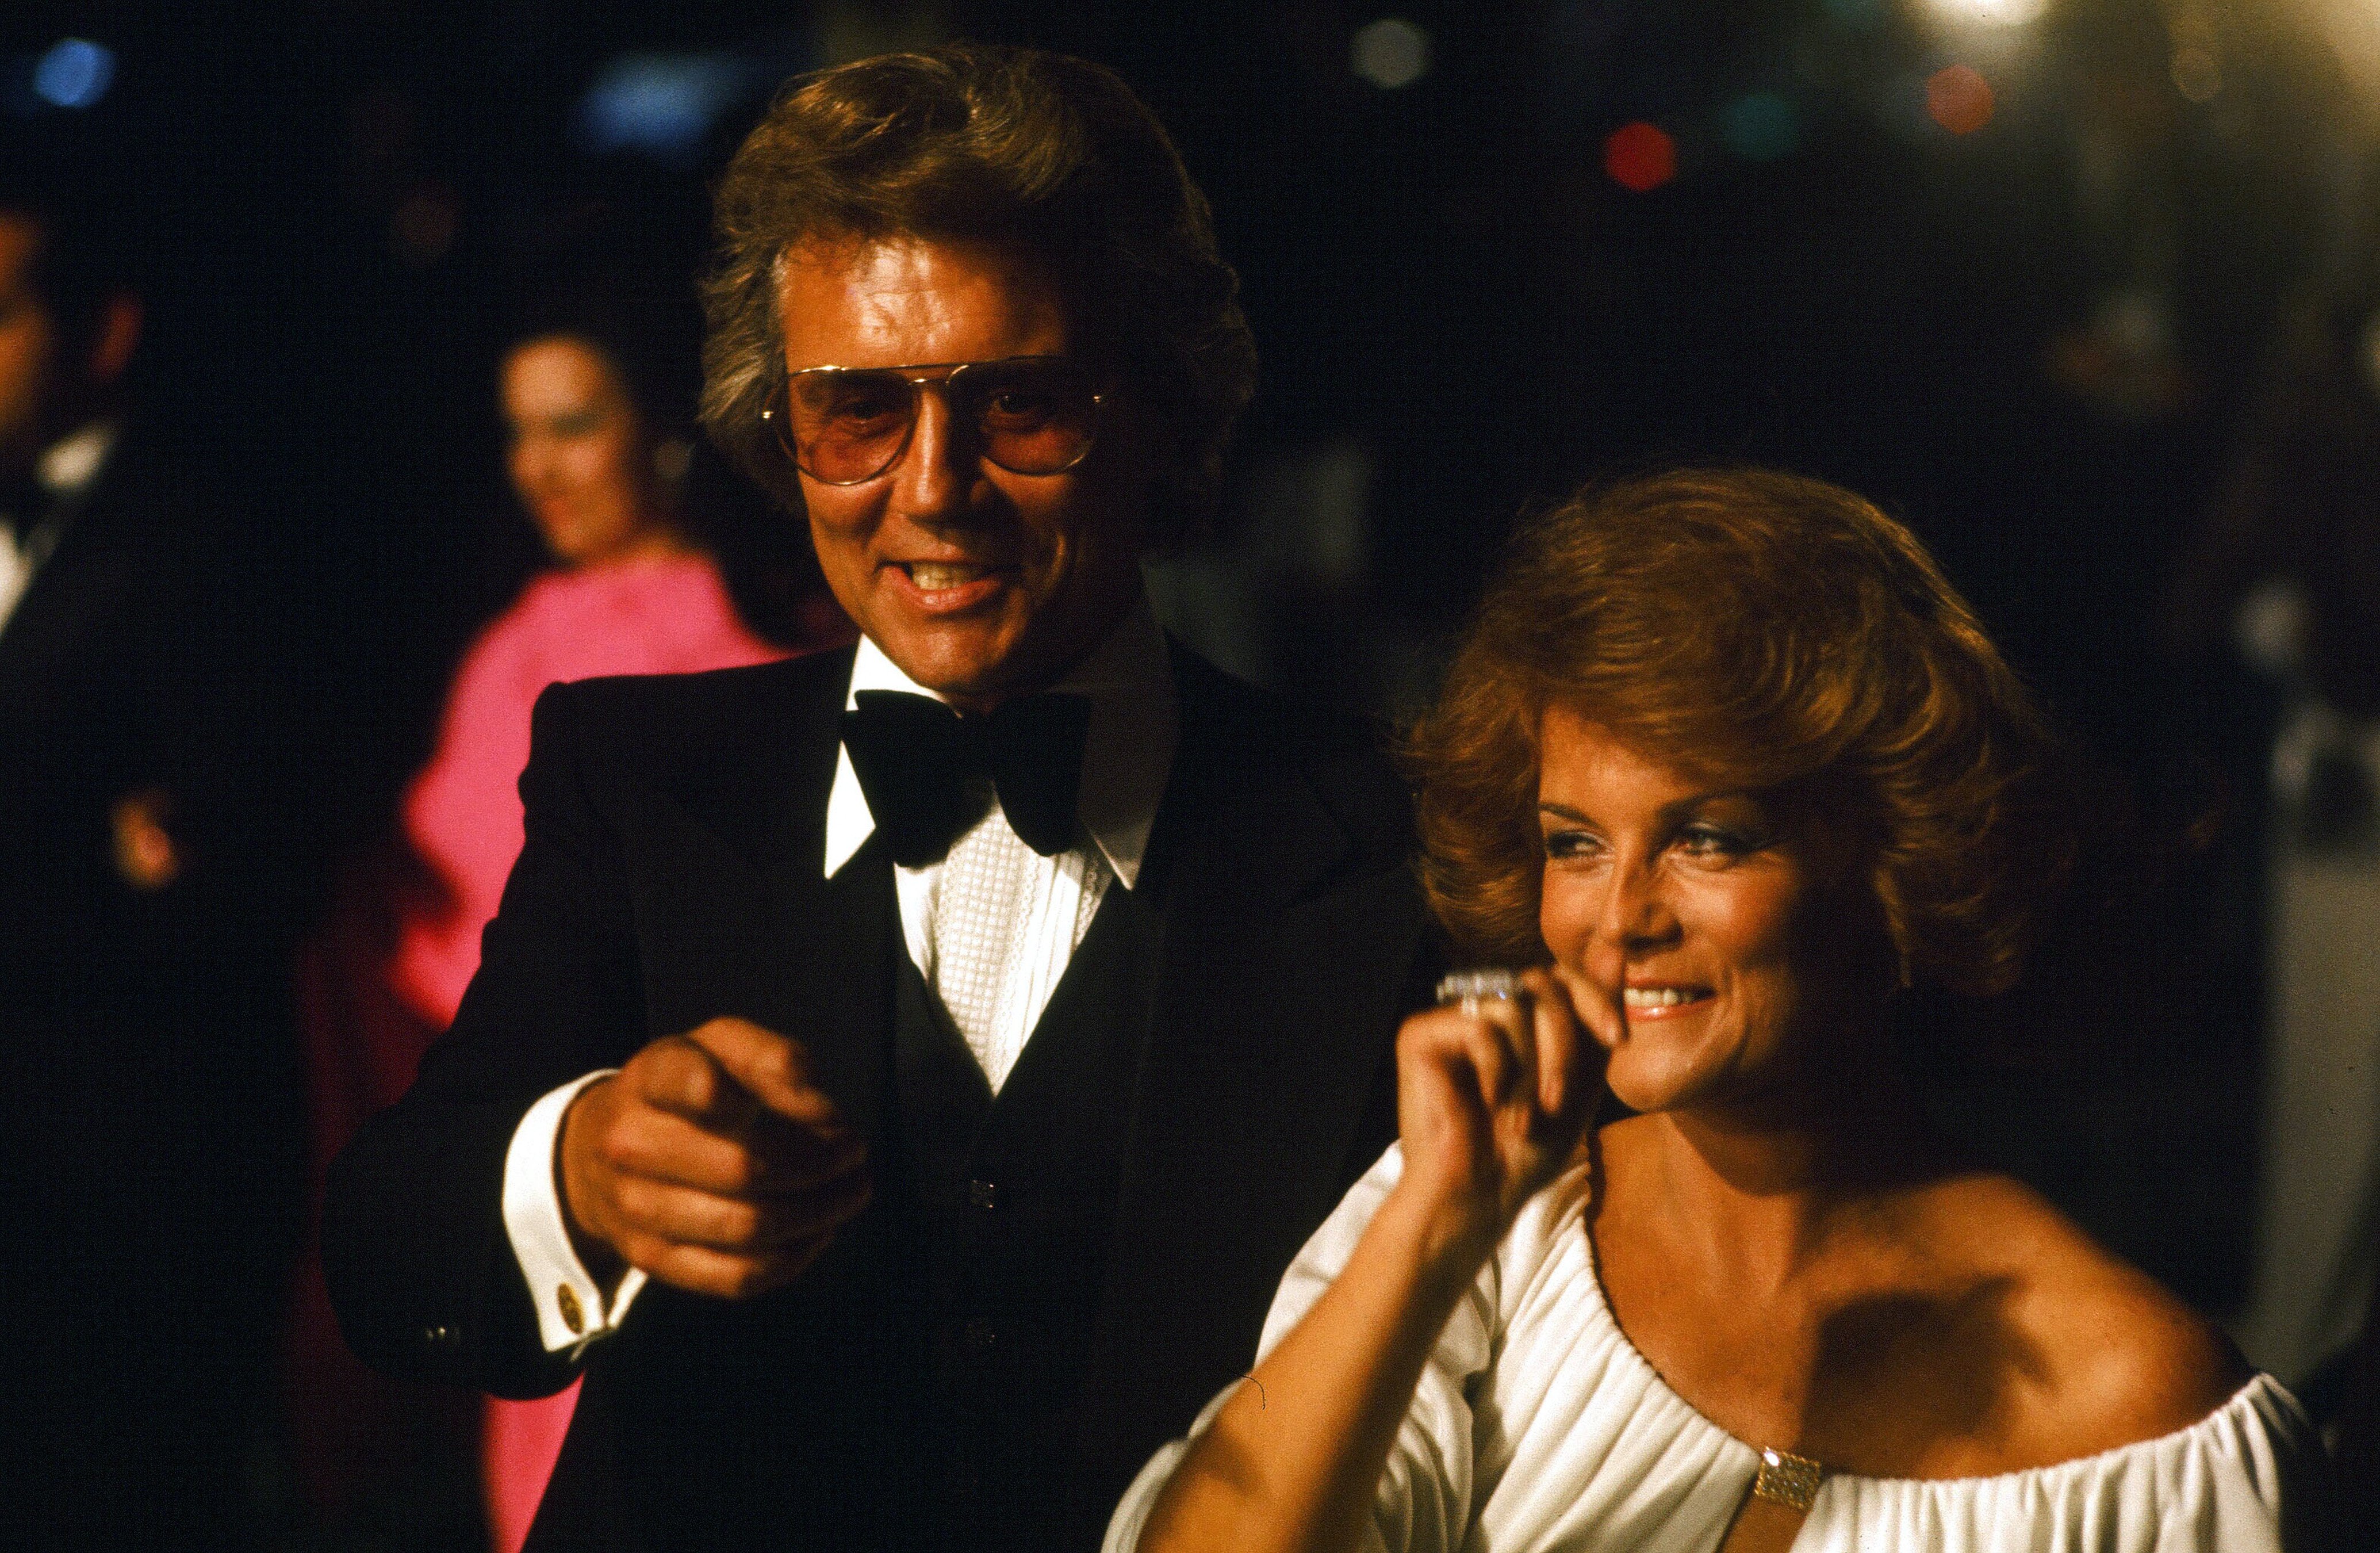 Roger Smith and wife Ann-Margret during the 48th Academy Awards at Dorothy Chandler Pavilion on March 29,1976 in Los Angeles, California. / Source: Getty Images 